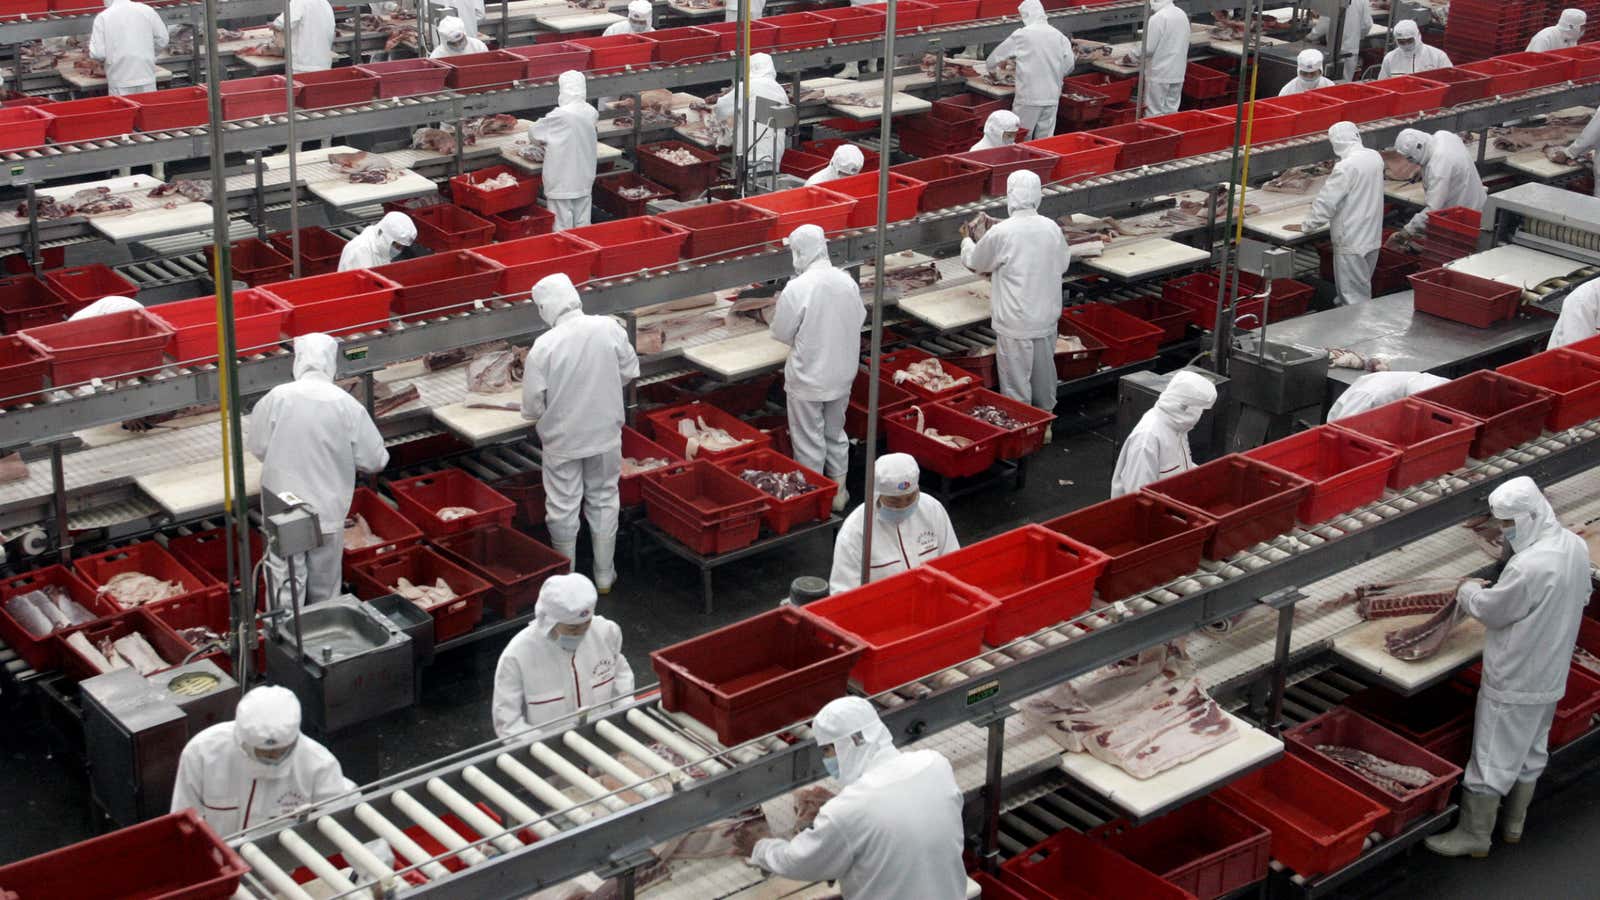 Thanks to Shuanghui’s Smithfield investment, 70,000 US workers will soon be bringing home the China-sponsored bacon.